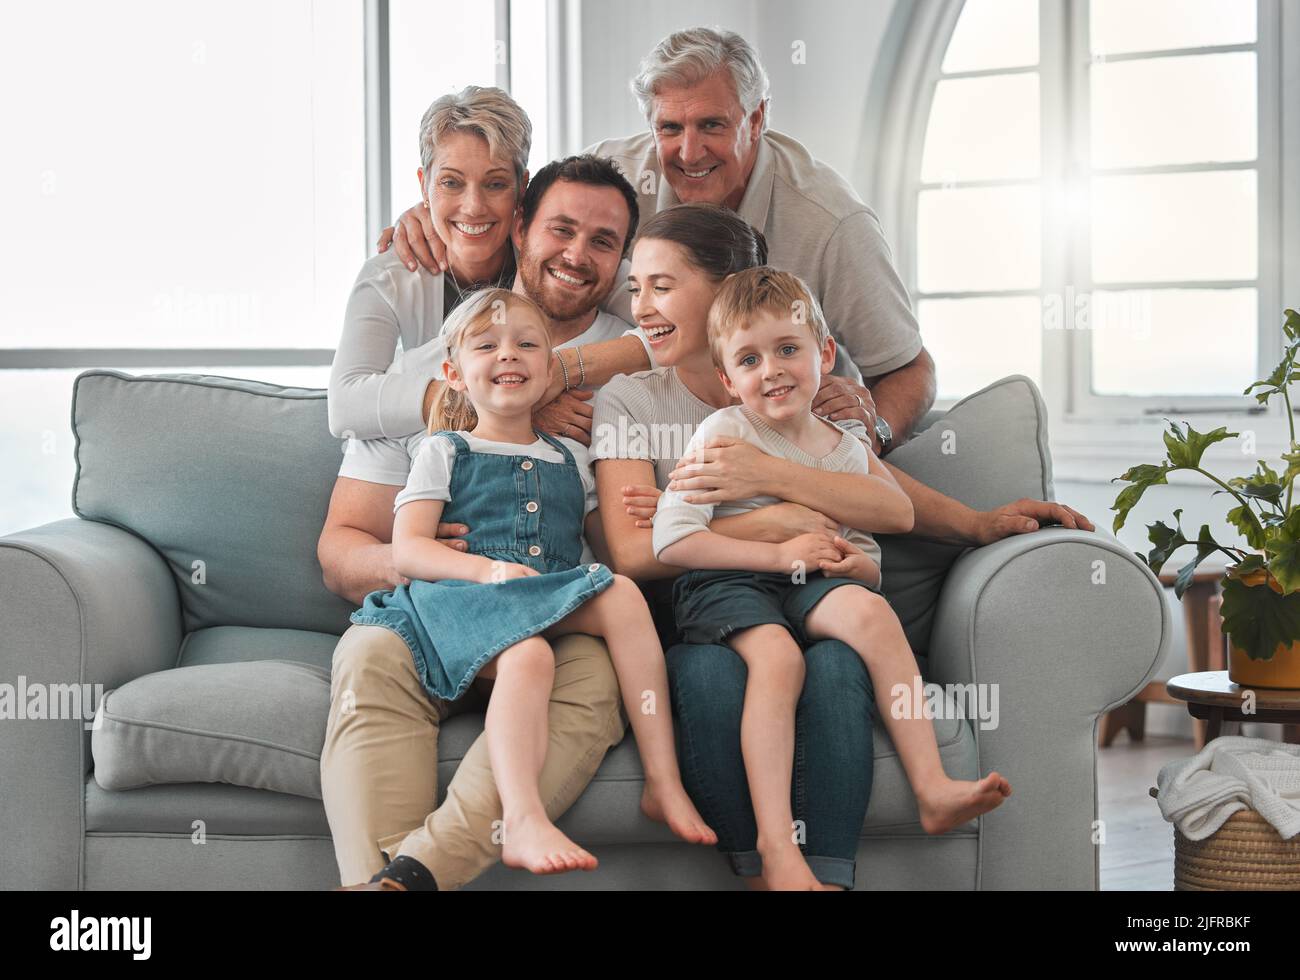 The memories we make with our family is everything. Shot of a happy family relaxing on the sofa at home. Stock Photo